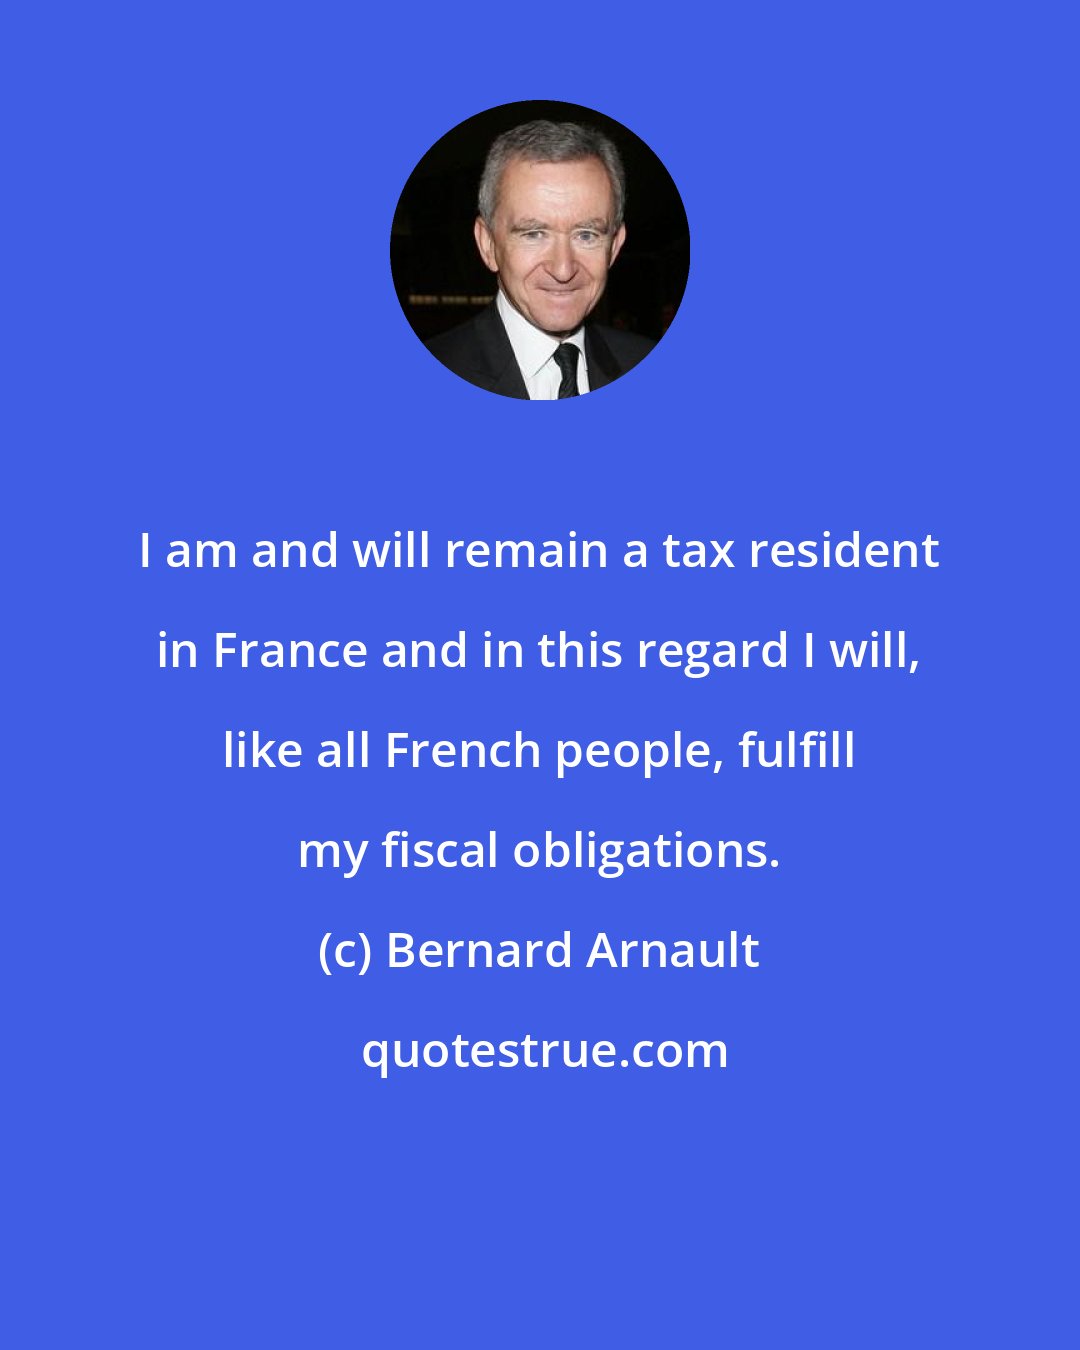 Bernard Arnault: I am and will remain a tax resident in France and in this regard I will, like all French people, fulfill my fiscal obligations.